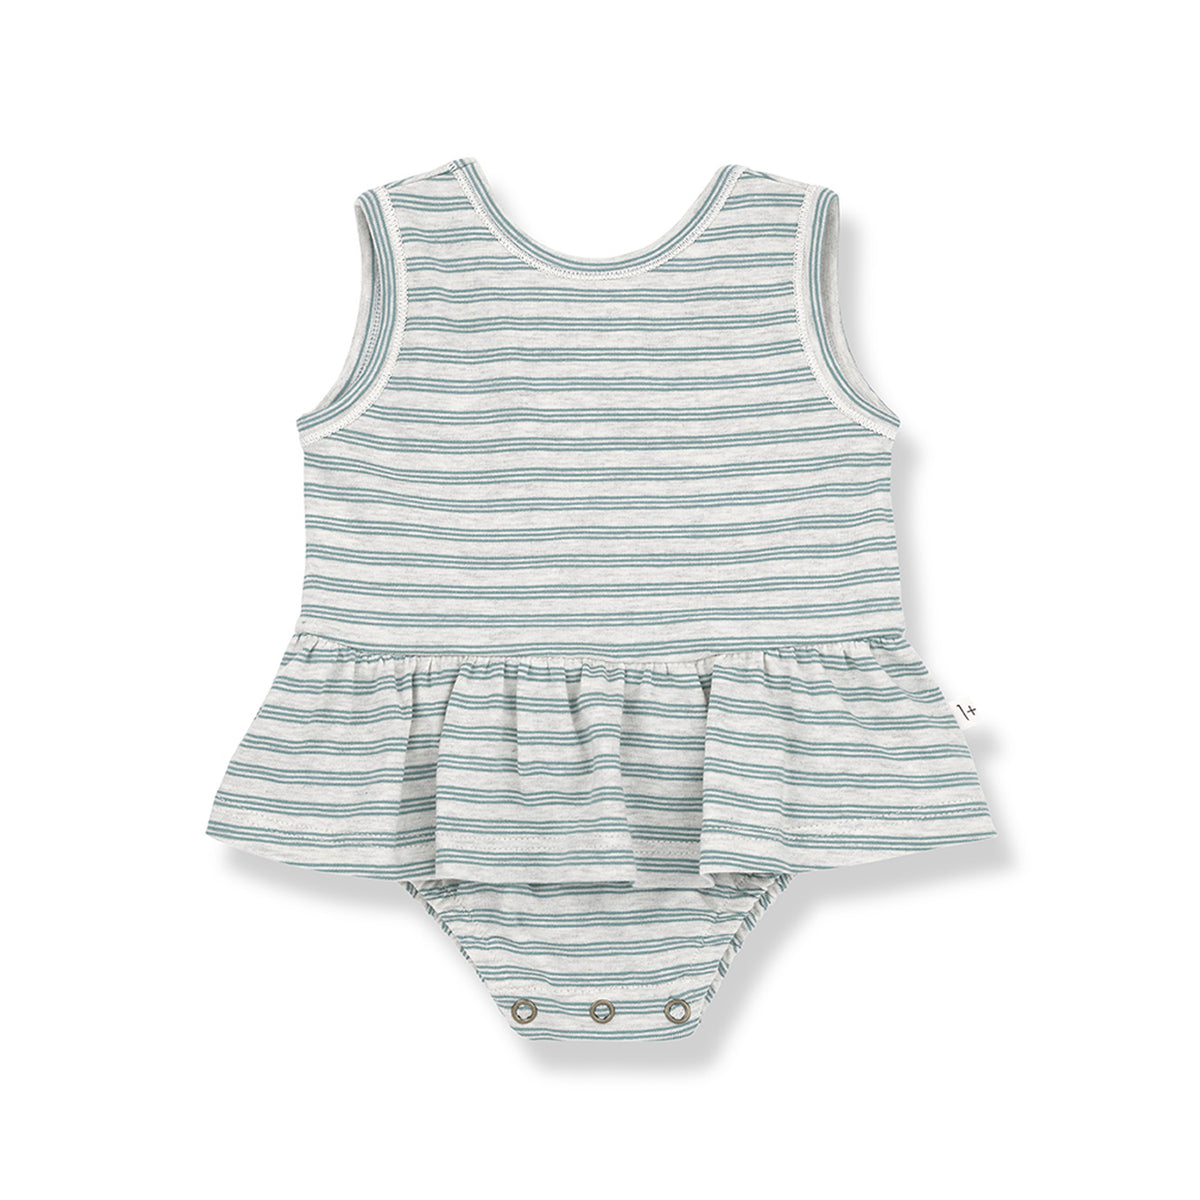 Mint green and white stripe baby dress 